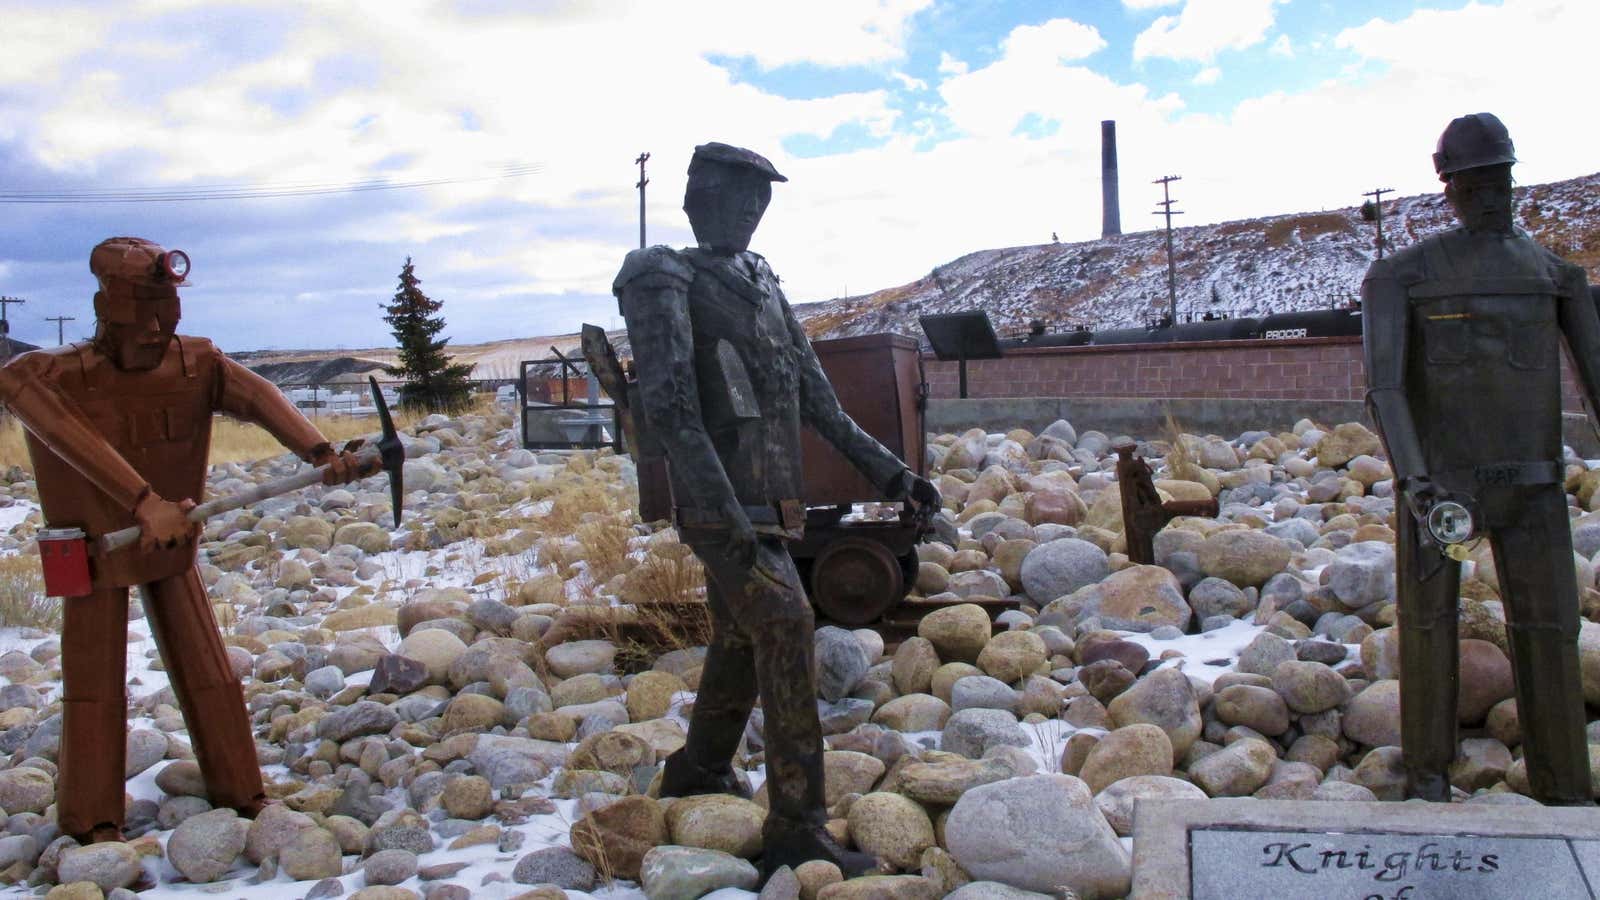 In Anaconda, Montana, a former smelter is both a toxic waste site and a point of local pride.